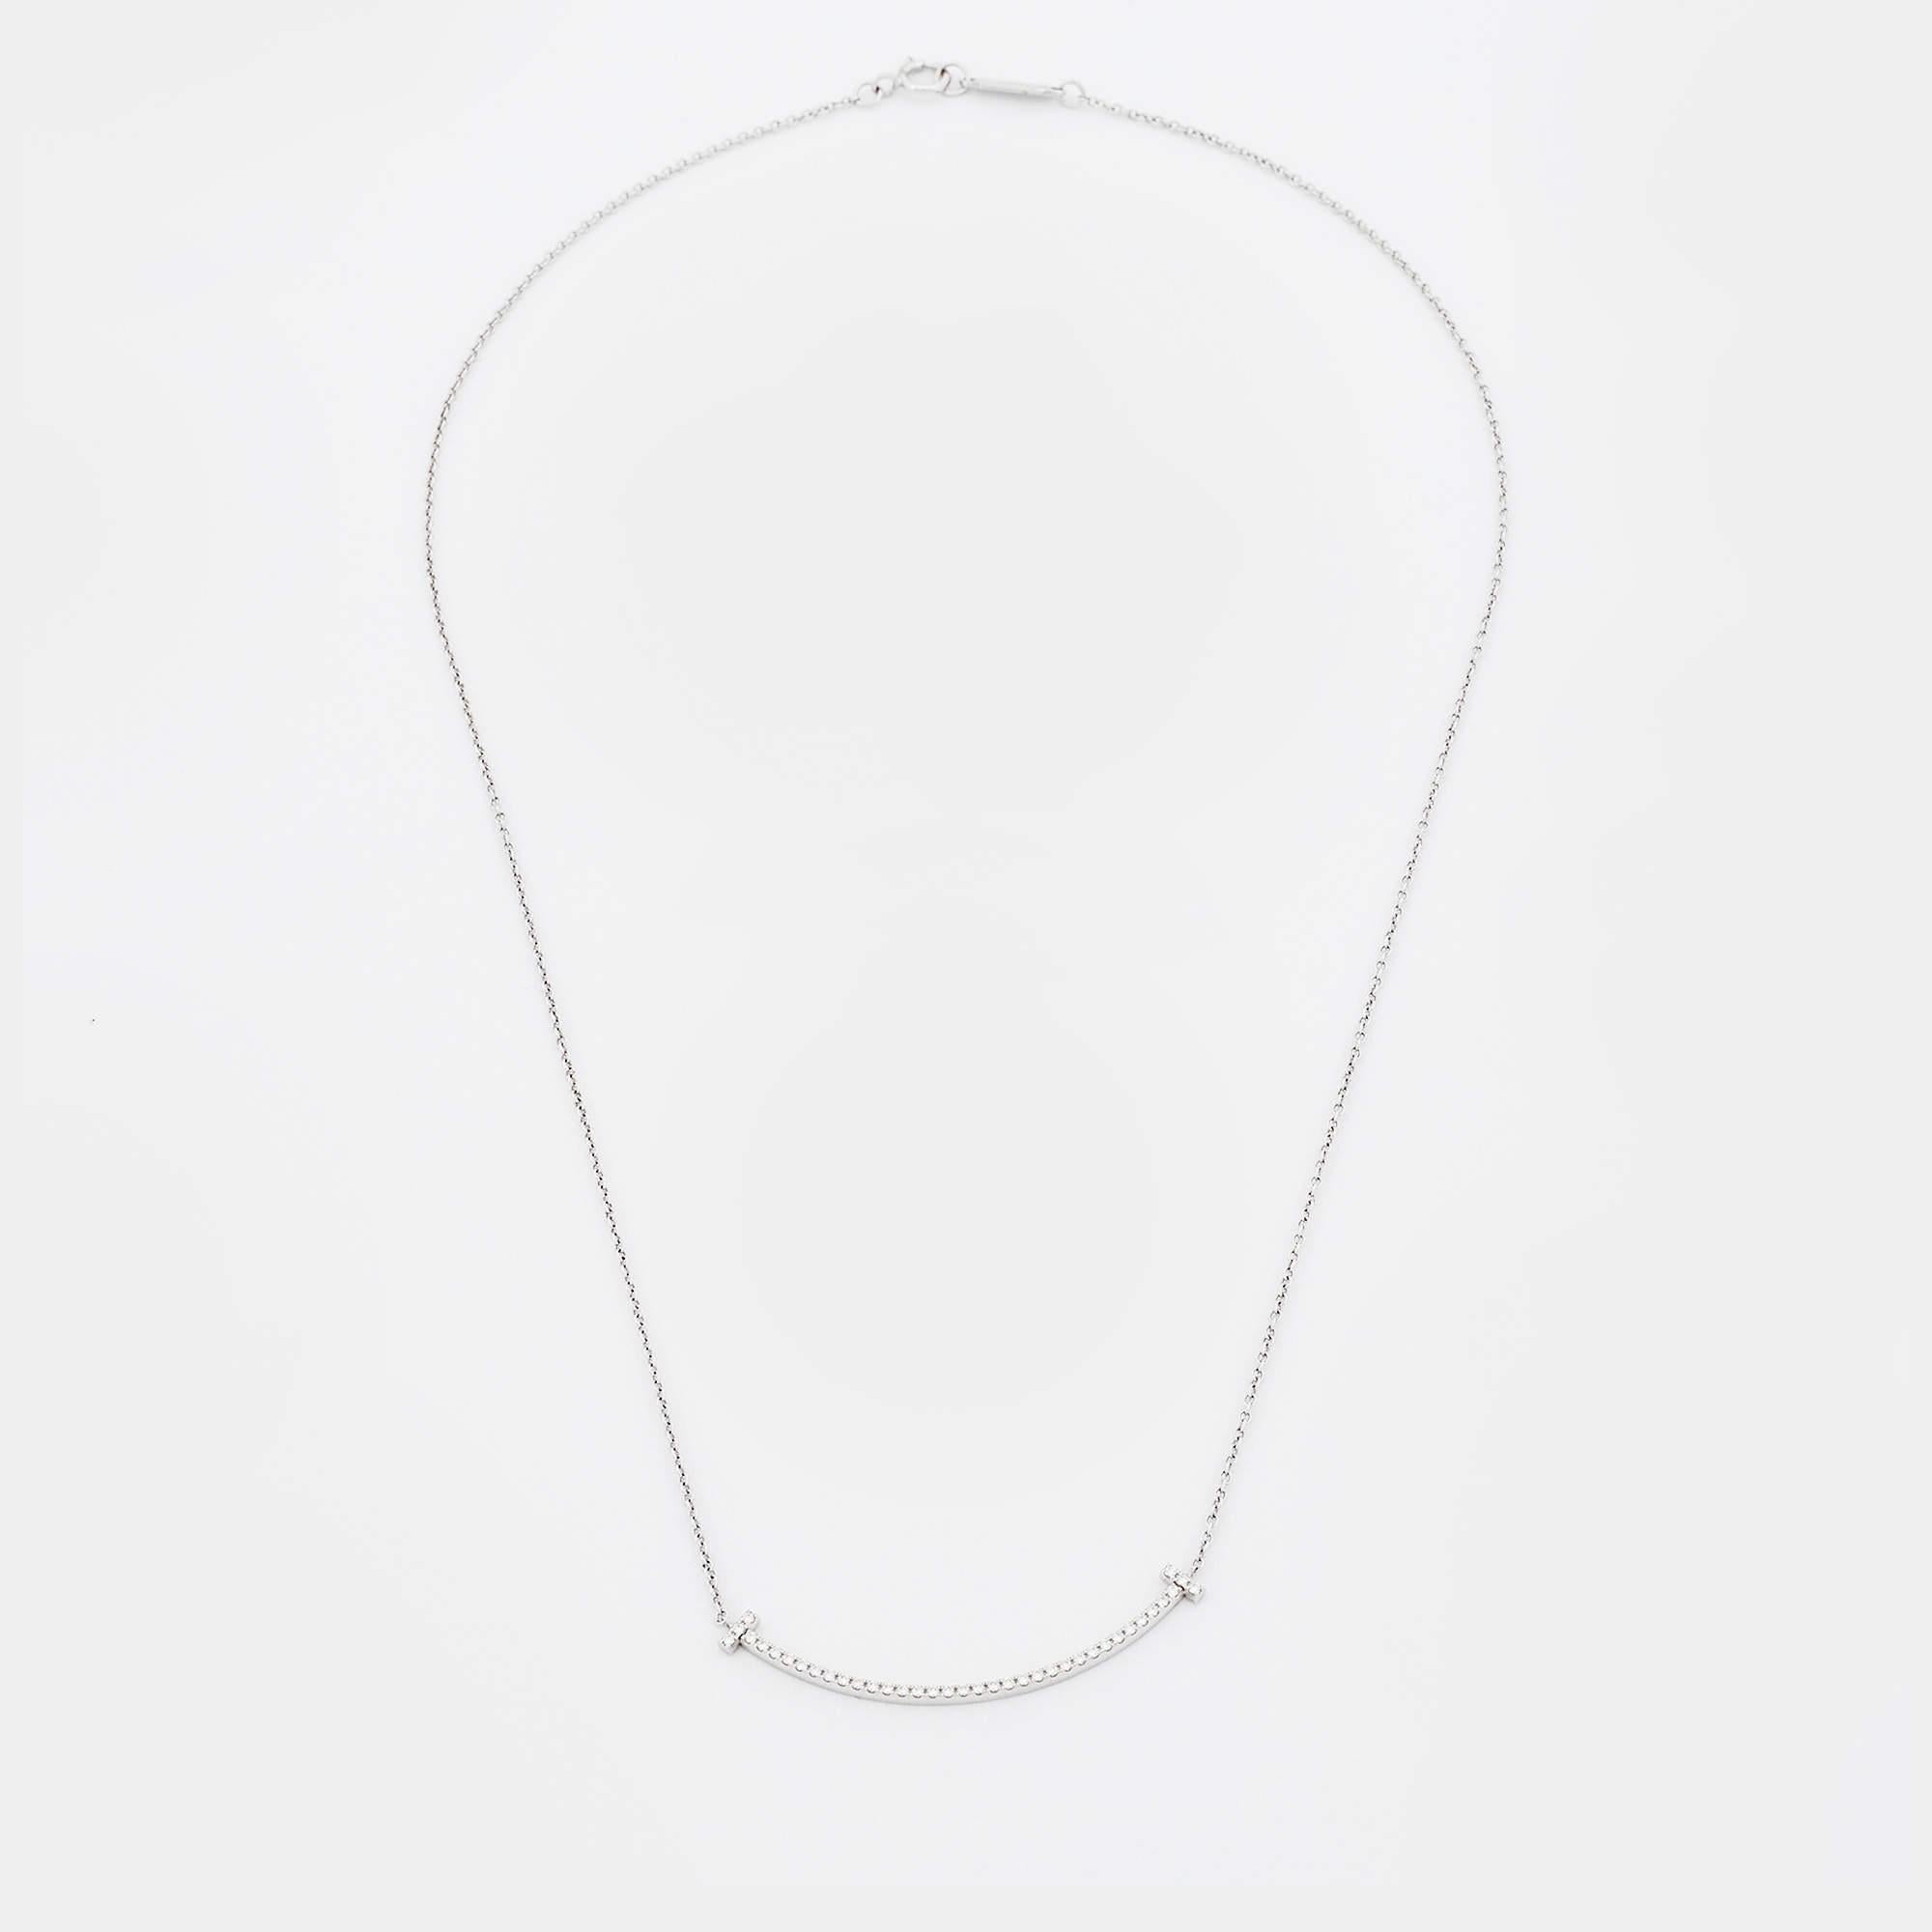 This Tiffany T Smile pendant necklace from Tiffany & Co. is a piece that you will always cherish wearing! Crafted from 18K white gold, it features a slender chain carrying a diamond-embellished T bar pendant that is shaped to resemble a smile. A